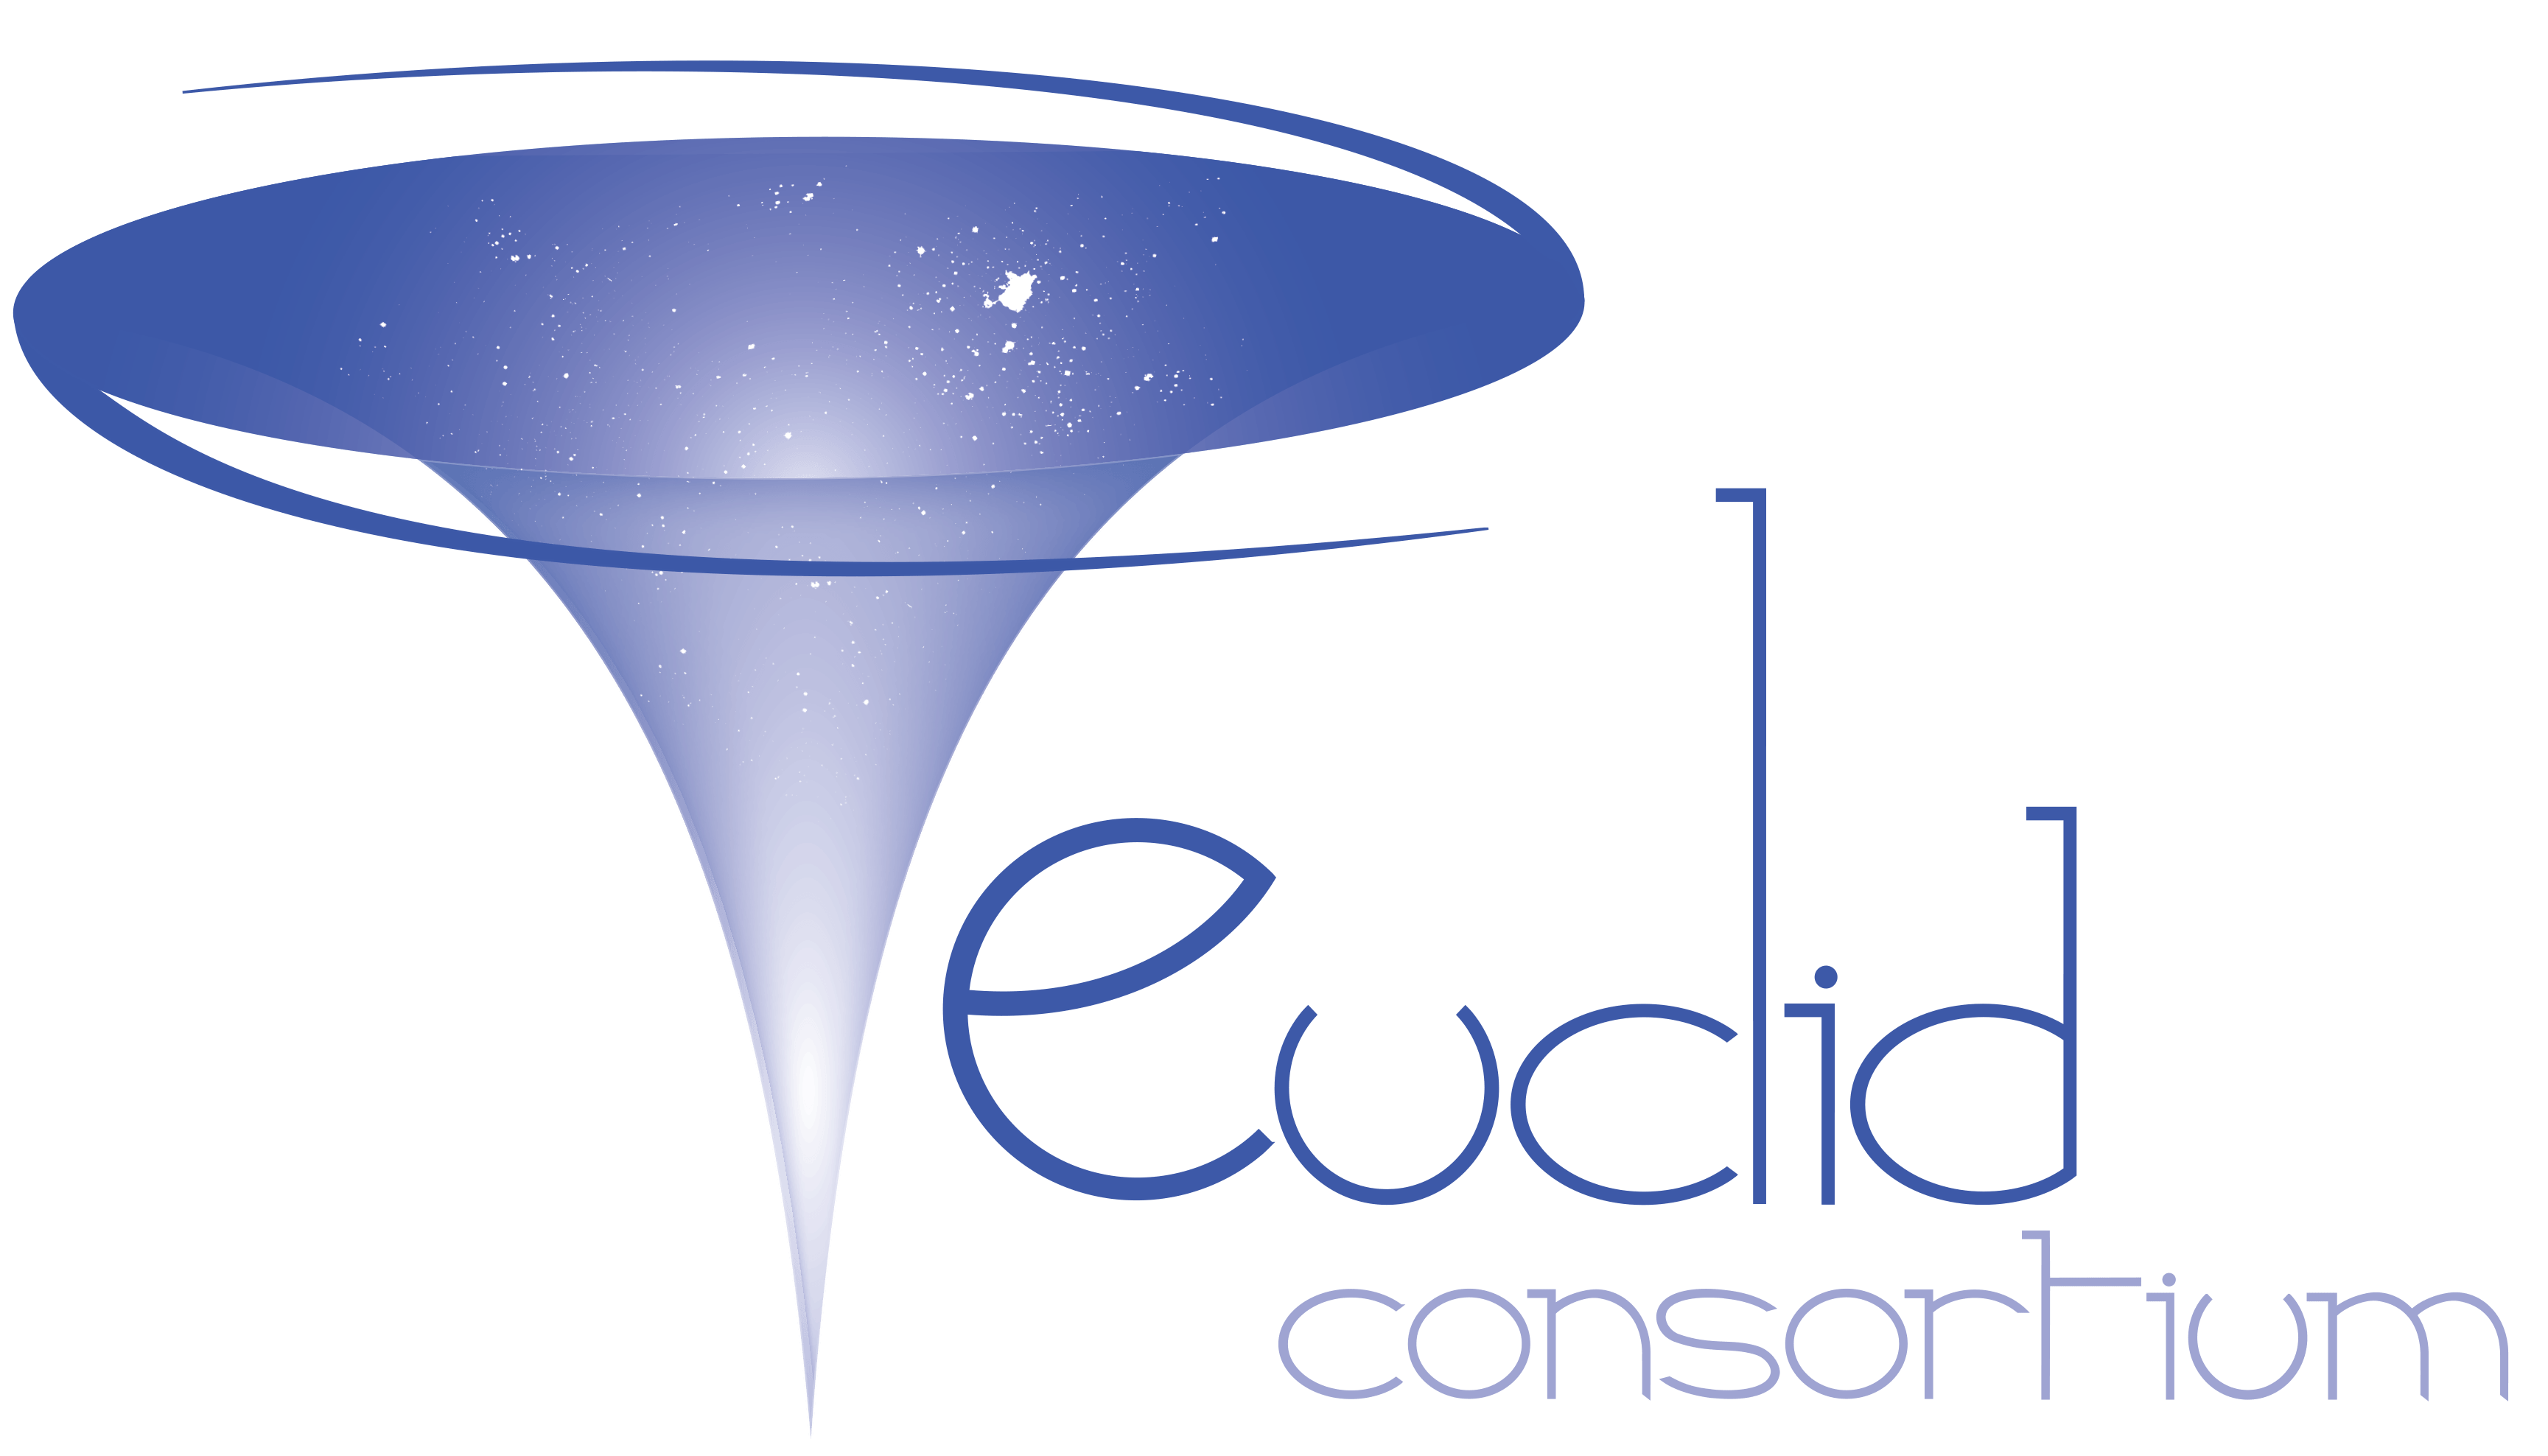 Euclid Logo - Euclid Consortium | A space mission to map the Dark Universe